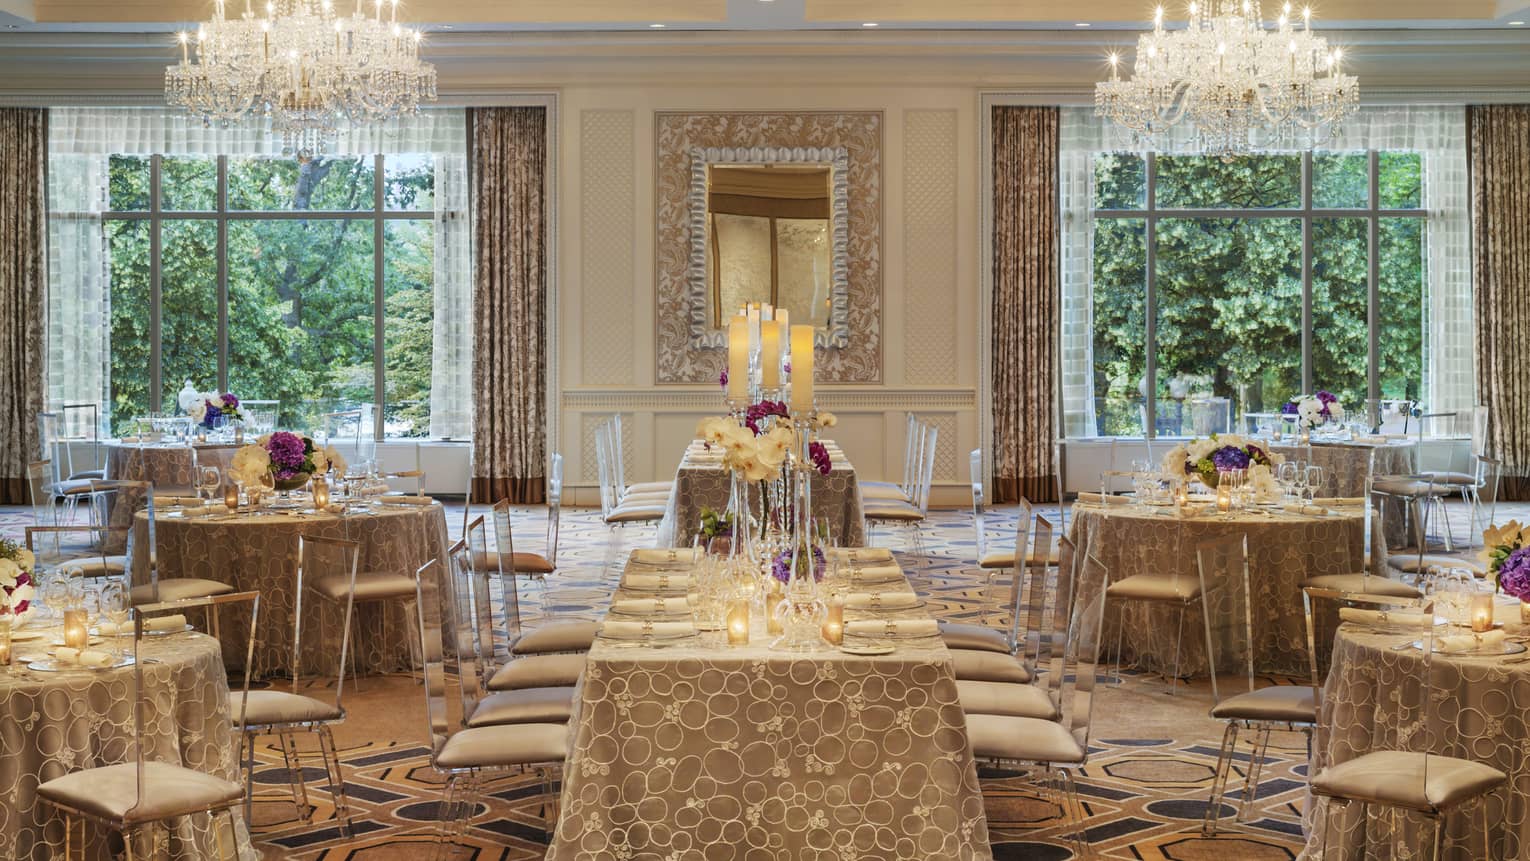 Ballroom Social setup with tables, chairs under two large windows, crystal chandeliers 